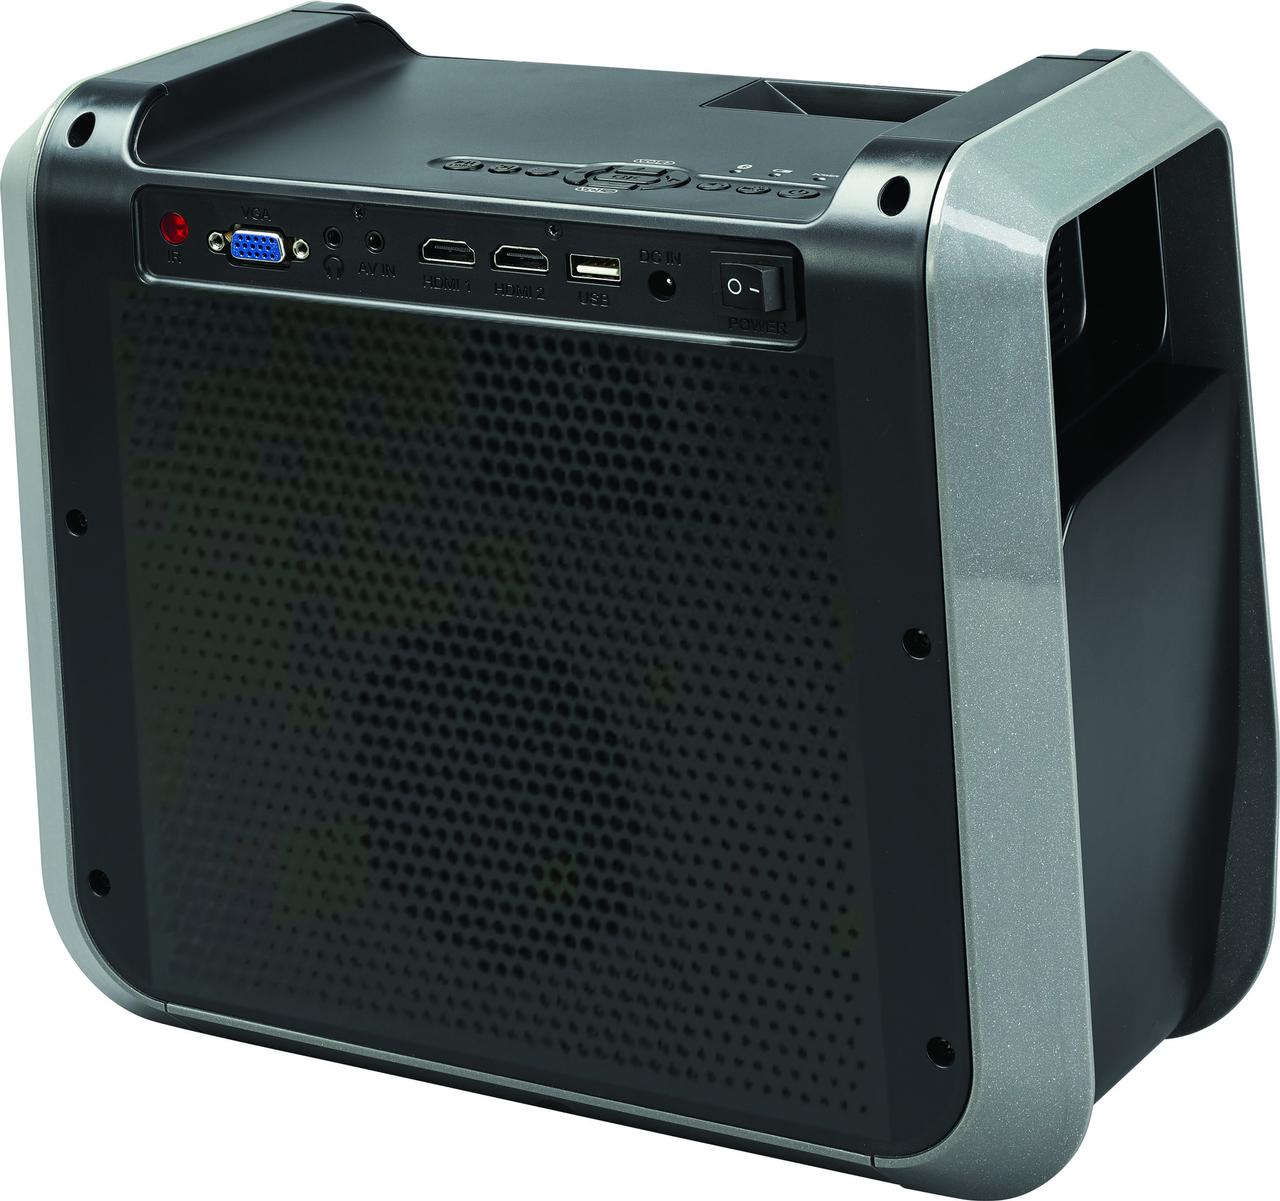 RCA RPJ060 Projector 150" Portable 1080p LED/LCD | Rechargeable Battery | Built-in Handles and Speaker - Black/Gray - image 4 of 7